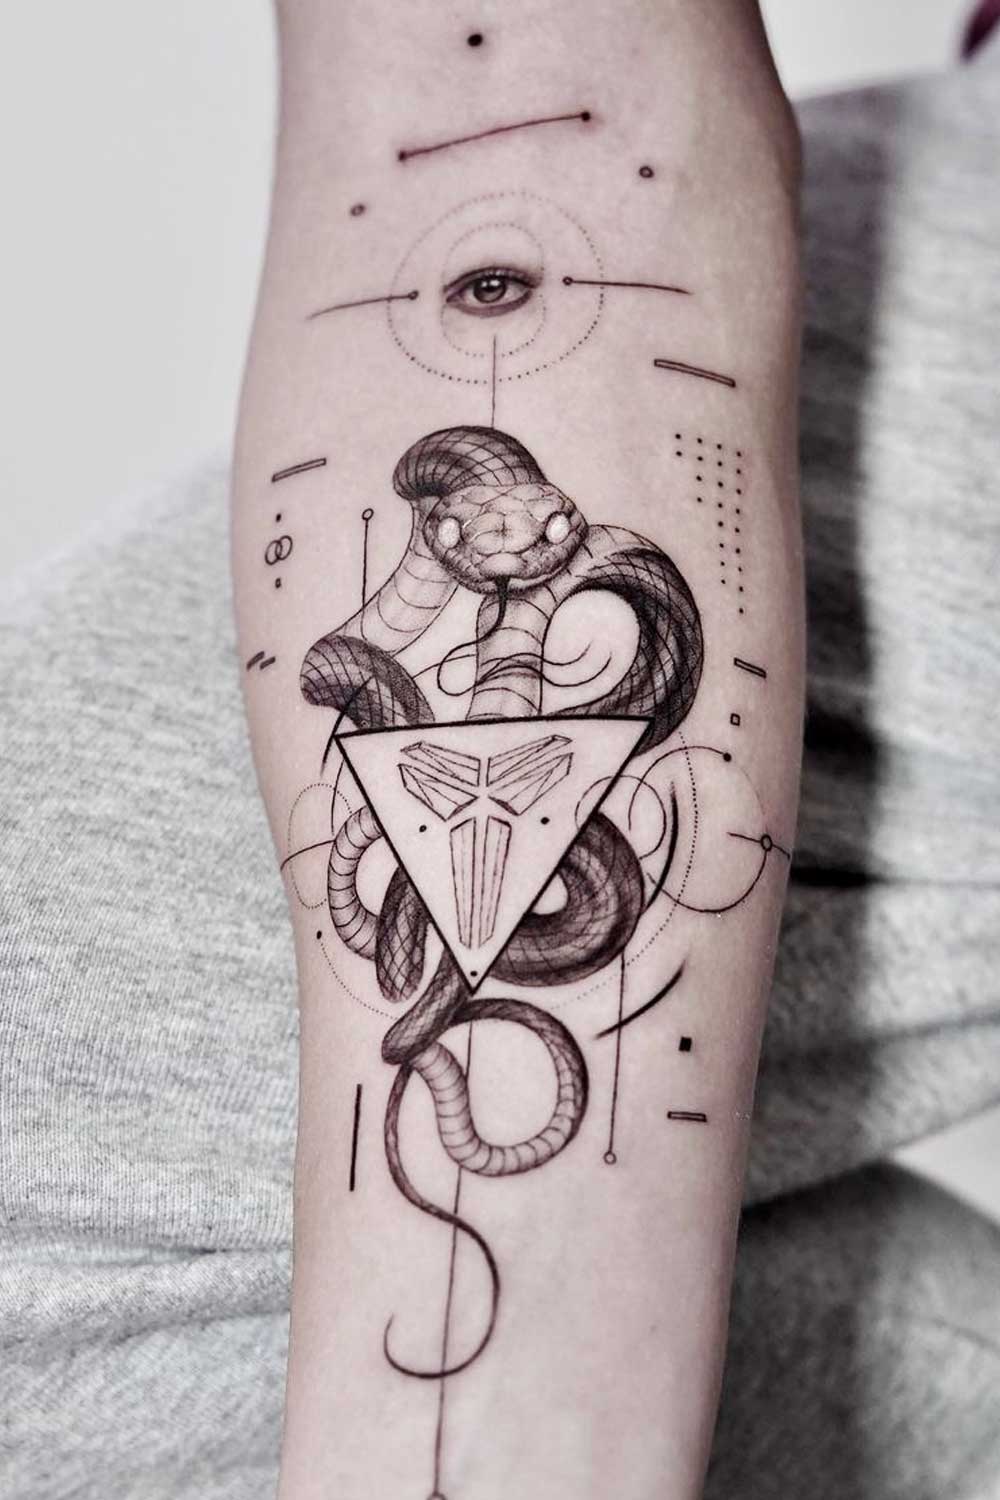 Snake Tattoo with Geometric Elements